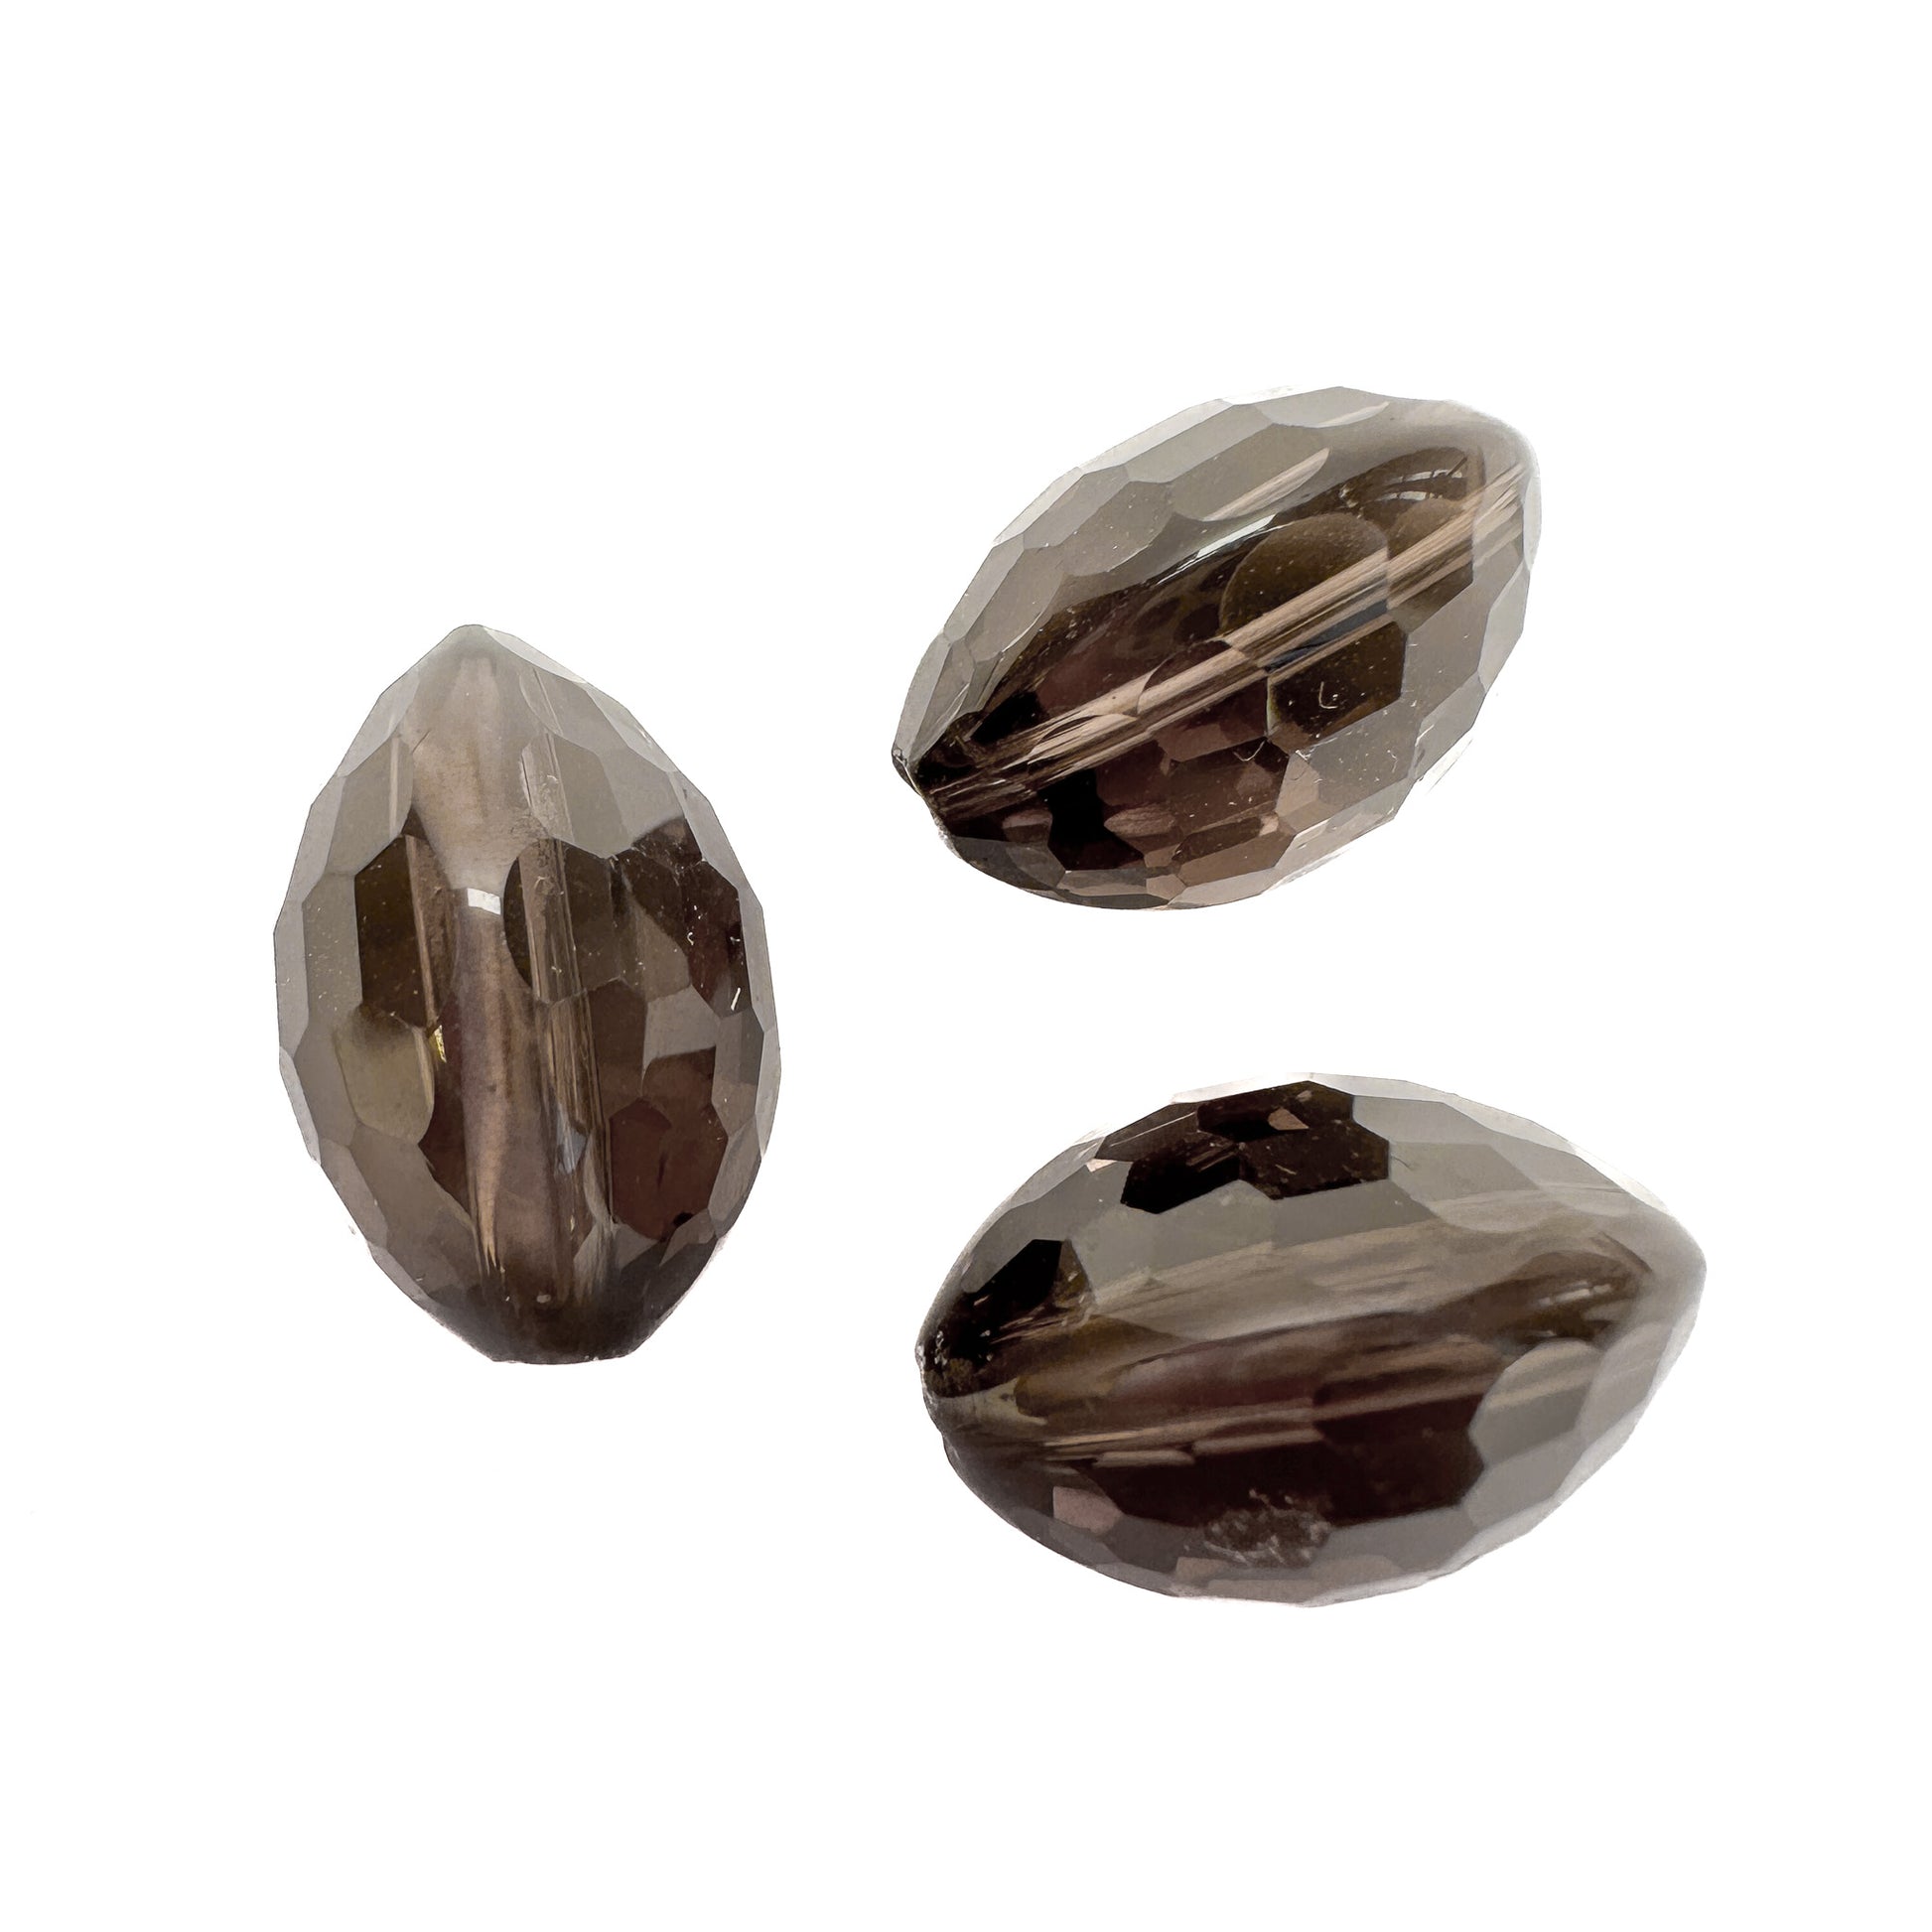 Smoky Quartz Faceted Long Drill Coconut - 1 pc.-The Bead Gallery Honolulu